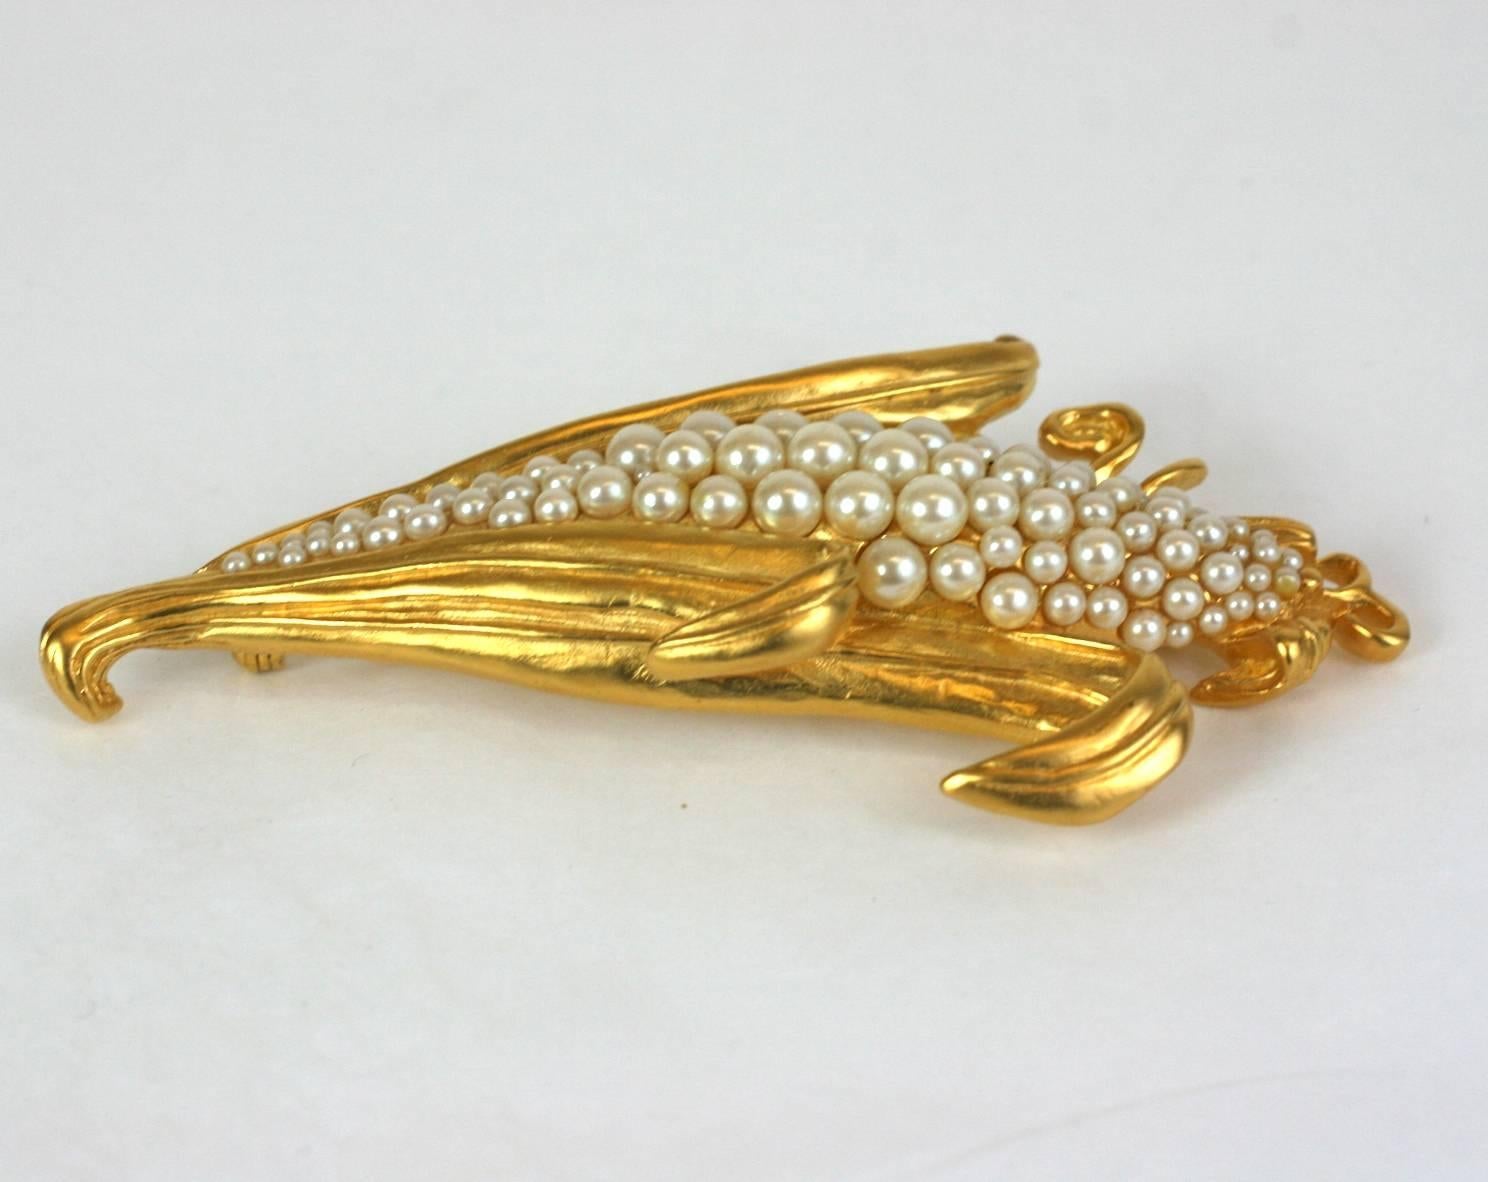 Karl Lagerfeld Pearl Corn Brooch from the 1980's. Large scale brooch with graduated glass pearls. 1980's France. Matte gold finish. Excellent condition. 
4